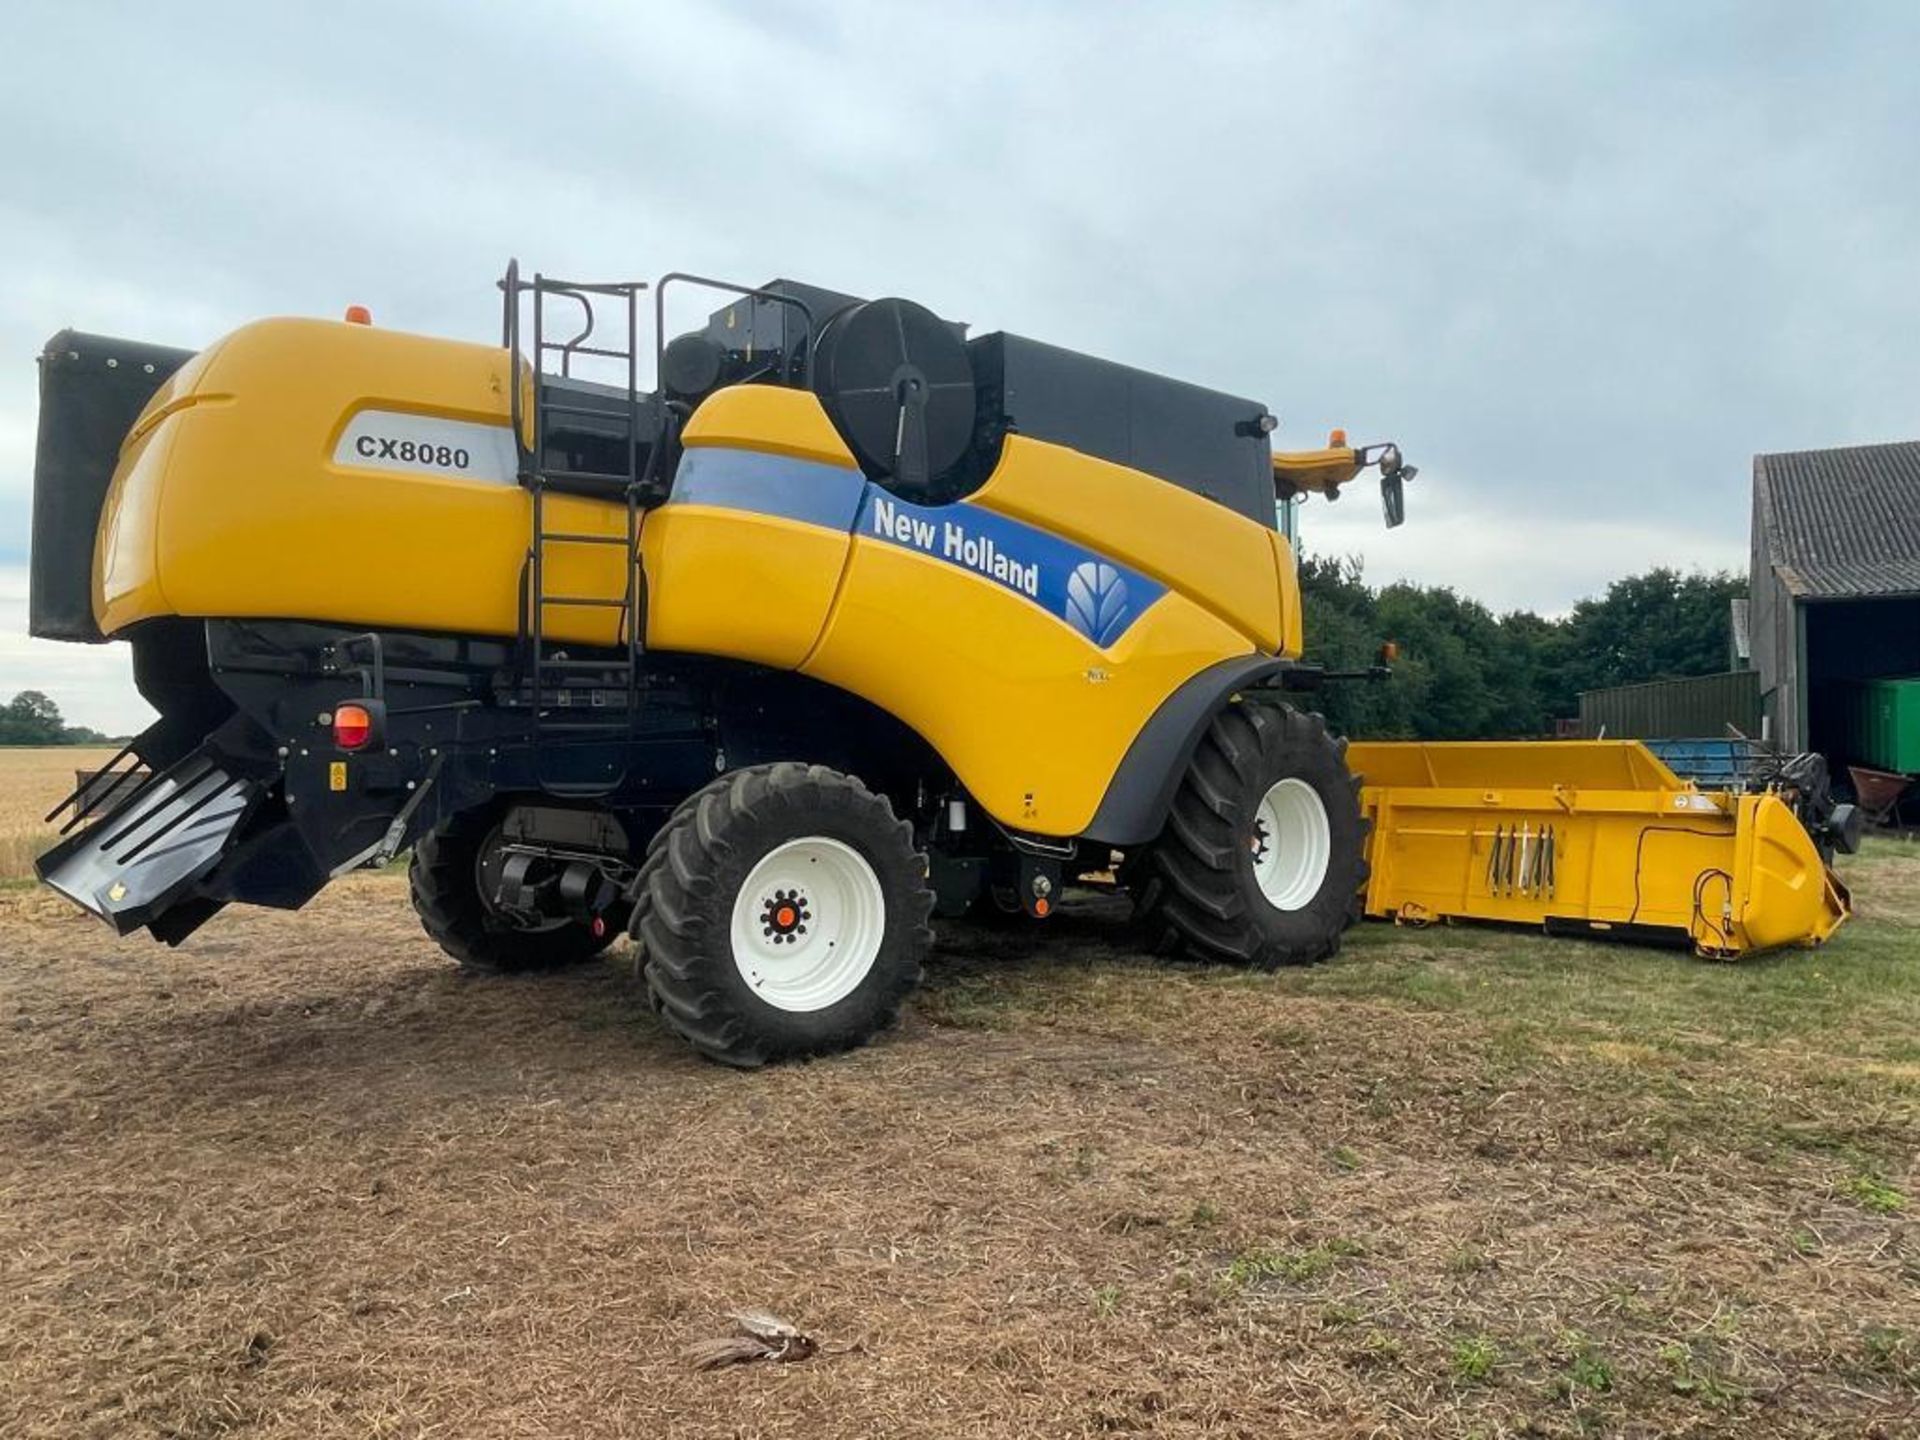 2010 New Holland CX8080 combine harvester with 25ft Varifeed header and trolley, straw chopper, 6 st - Image 10 of 21